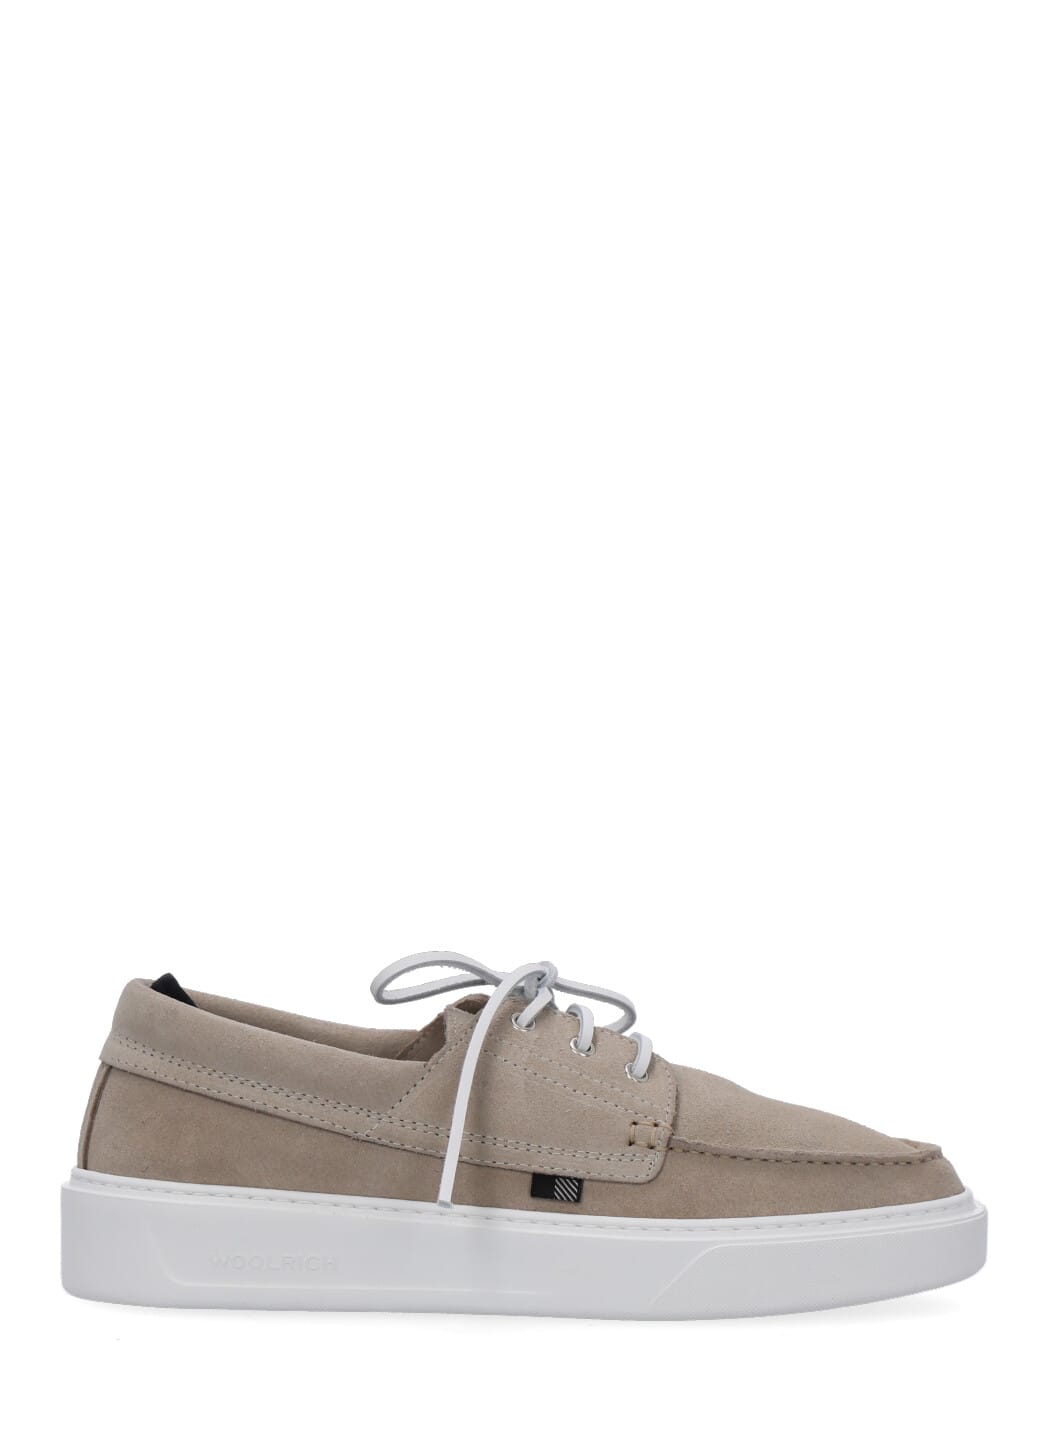 WOOLRICH SUEDE LEATHER BOAT SHOE,WFM211030 1200